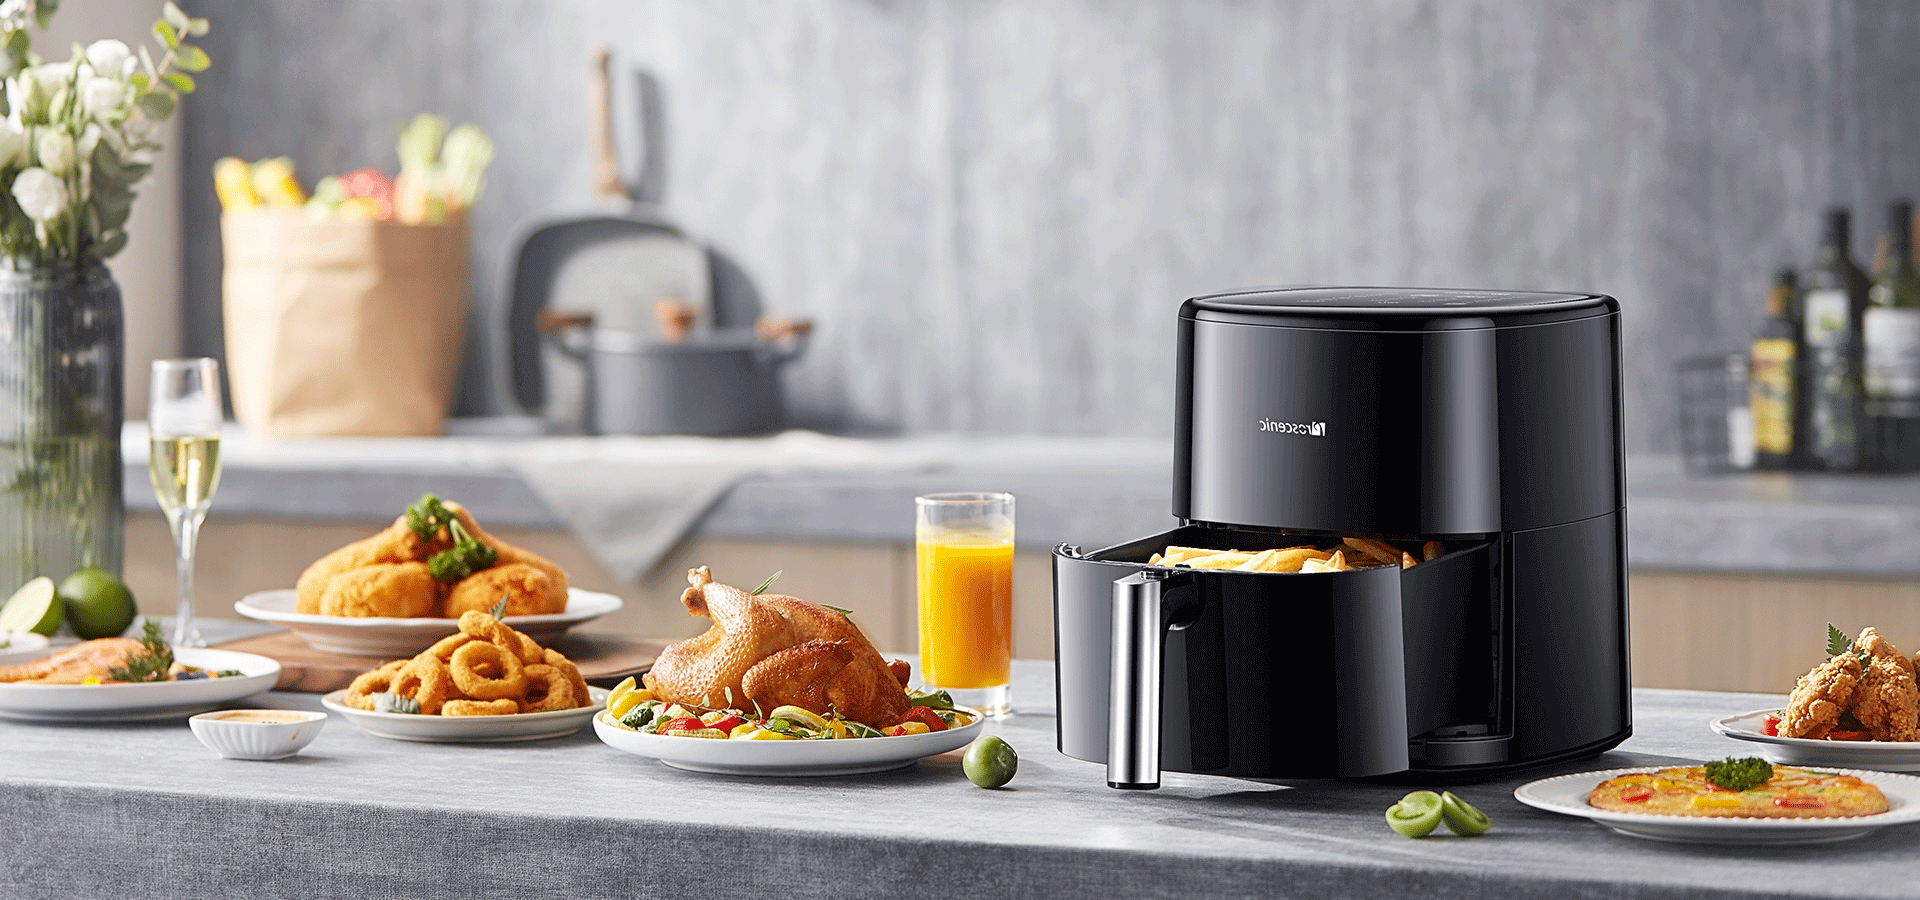 Proscenic T21/T22 Air Fryer| How to do daily maintenance